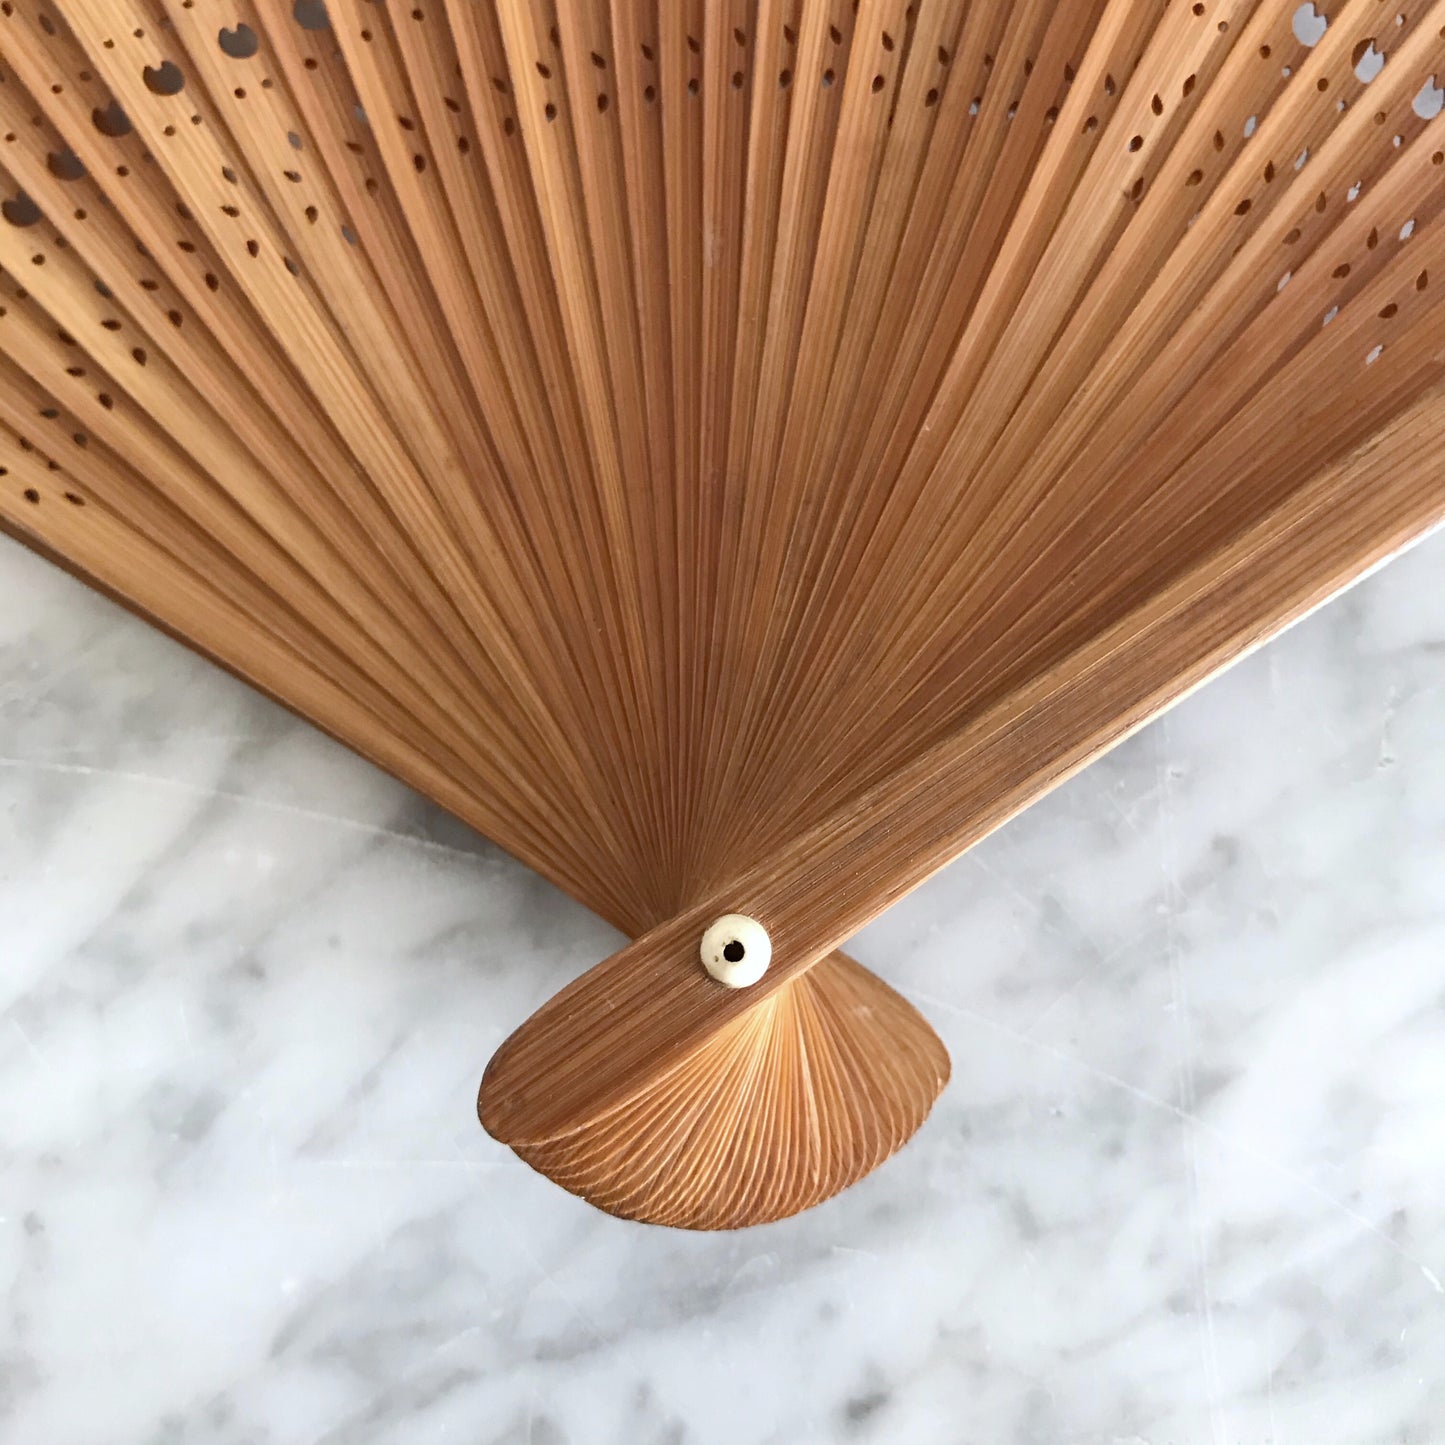 Vintage Paper Fan with Leaves